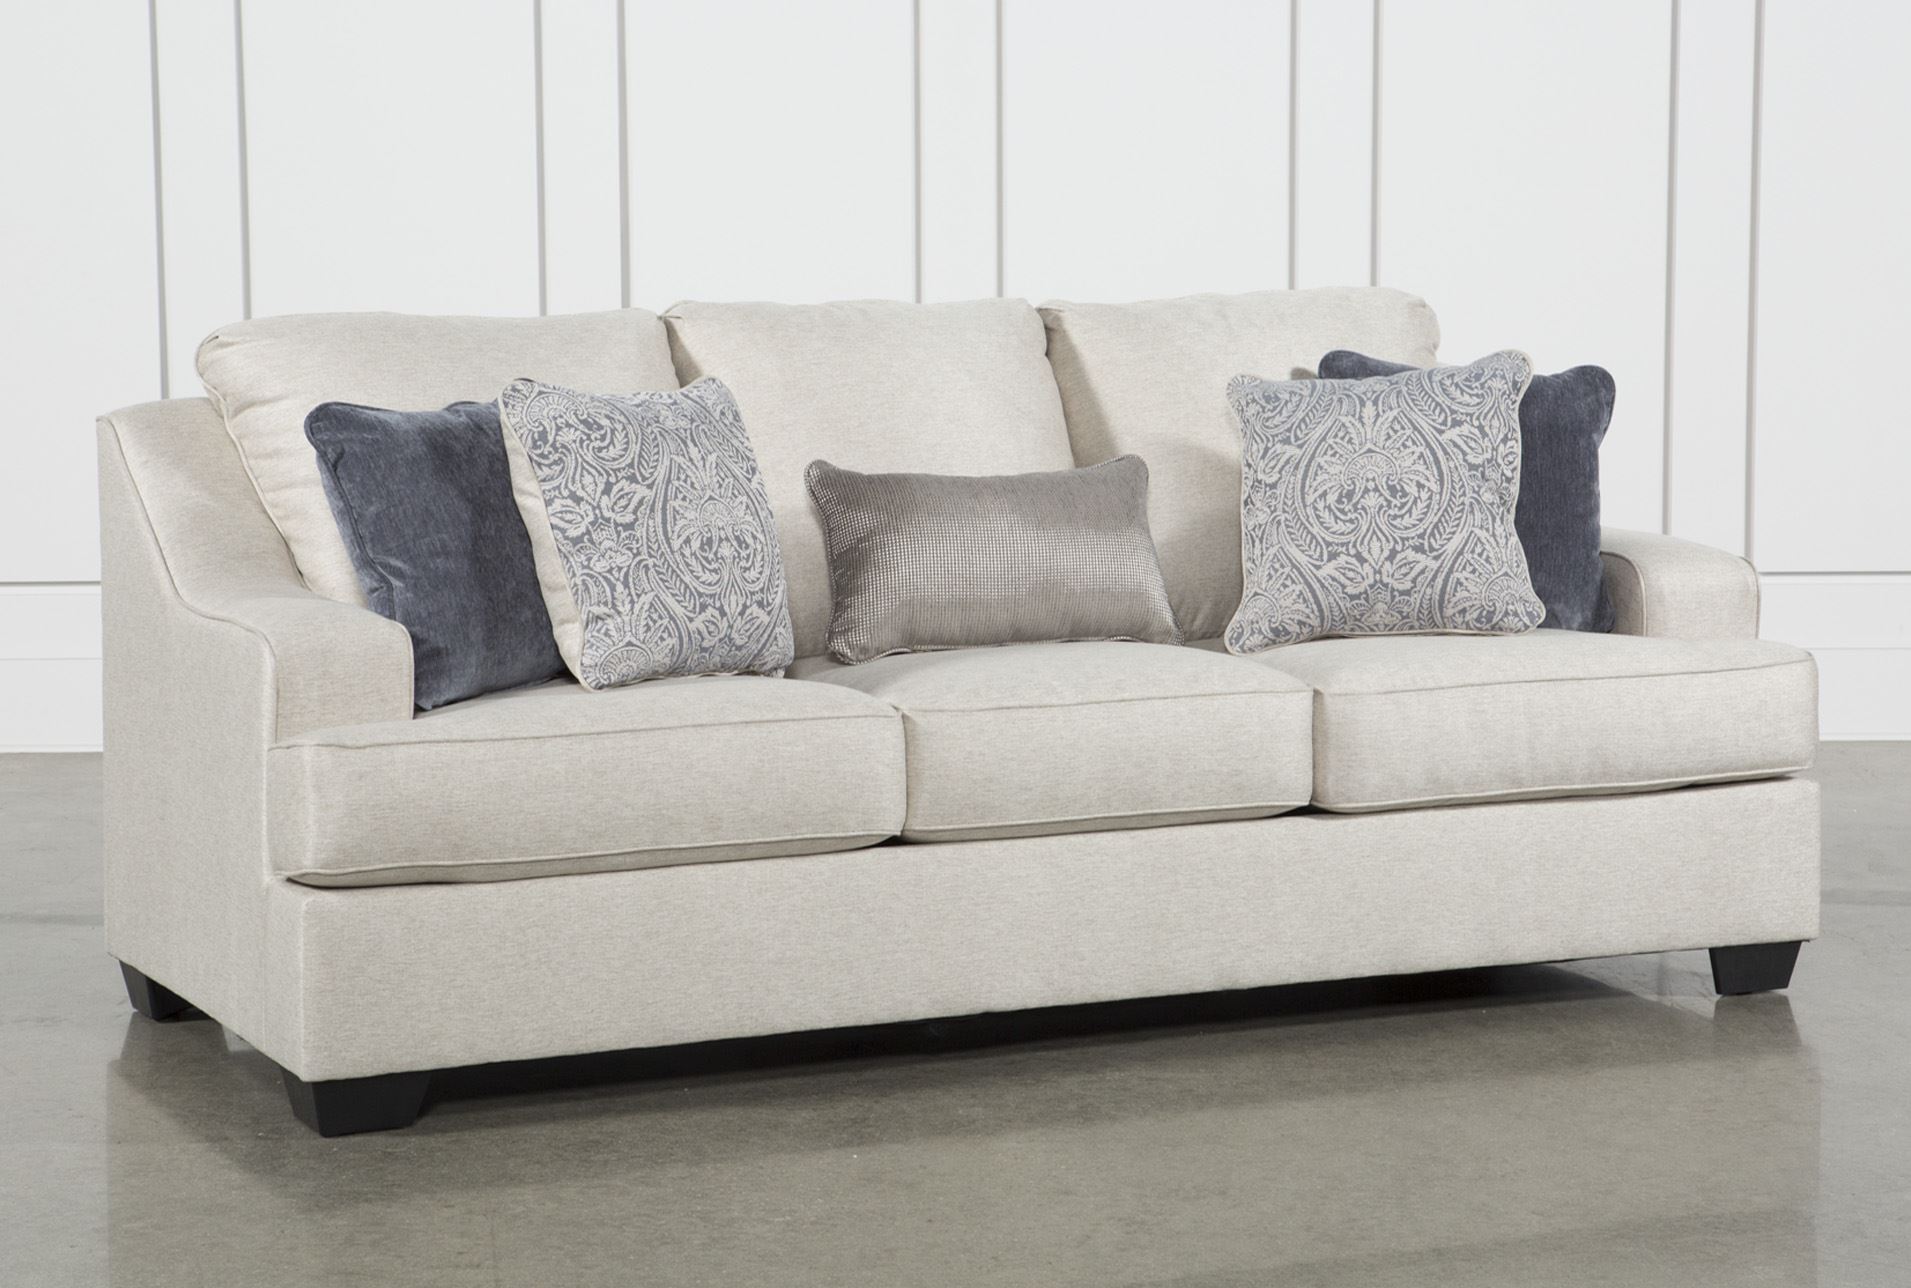 Brumbeck Queen Sofa Sleeper (Qty: 1) has been successfully added to your  Cart.